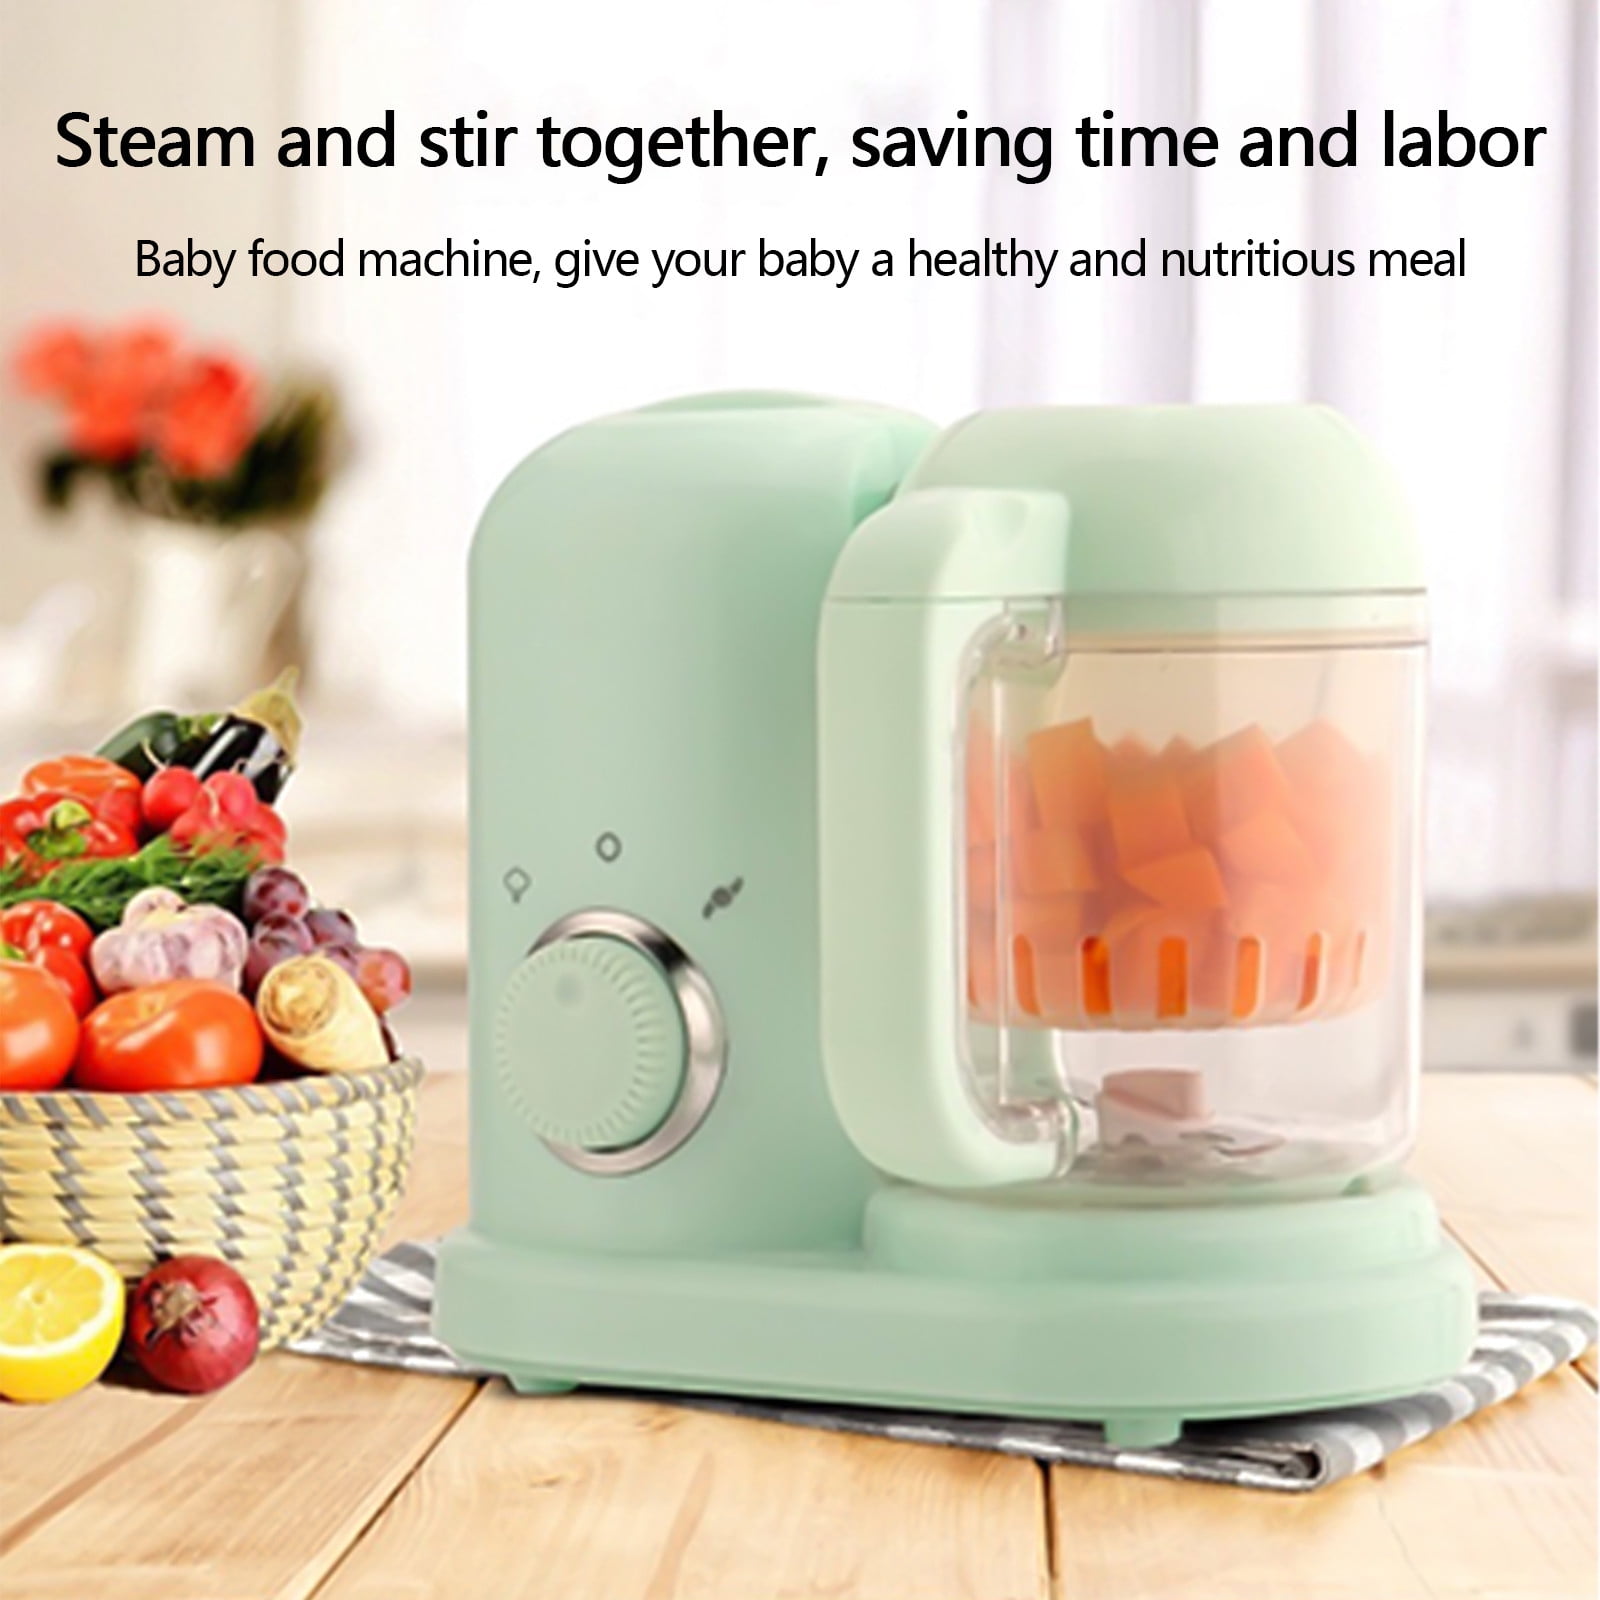 Baby Food Maker 220V Supplementary Food Cooker Baby Food Processor Kids  Food Mill Steaming Stirring Warming Cooking Machine